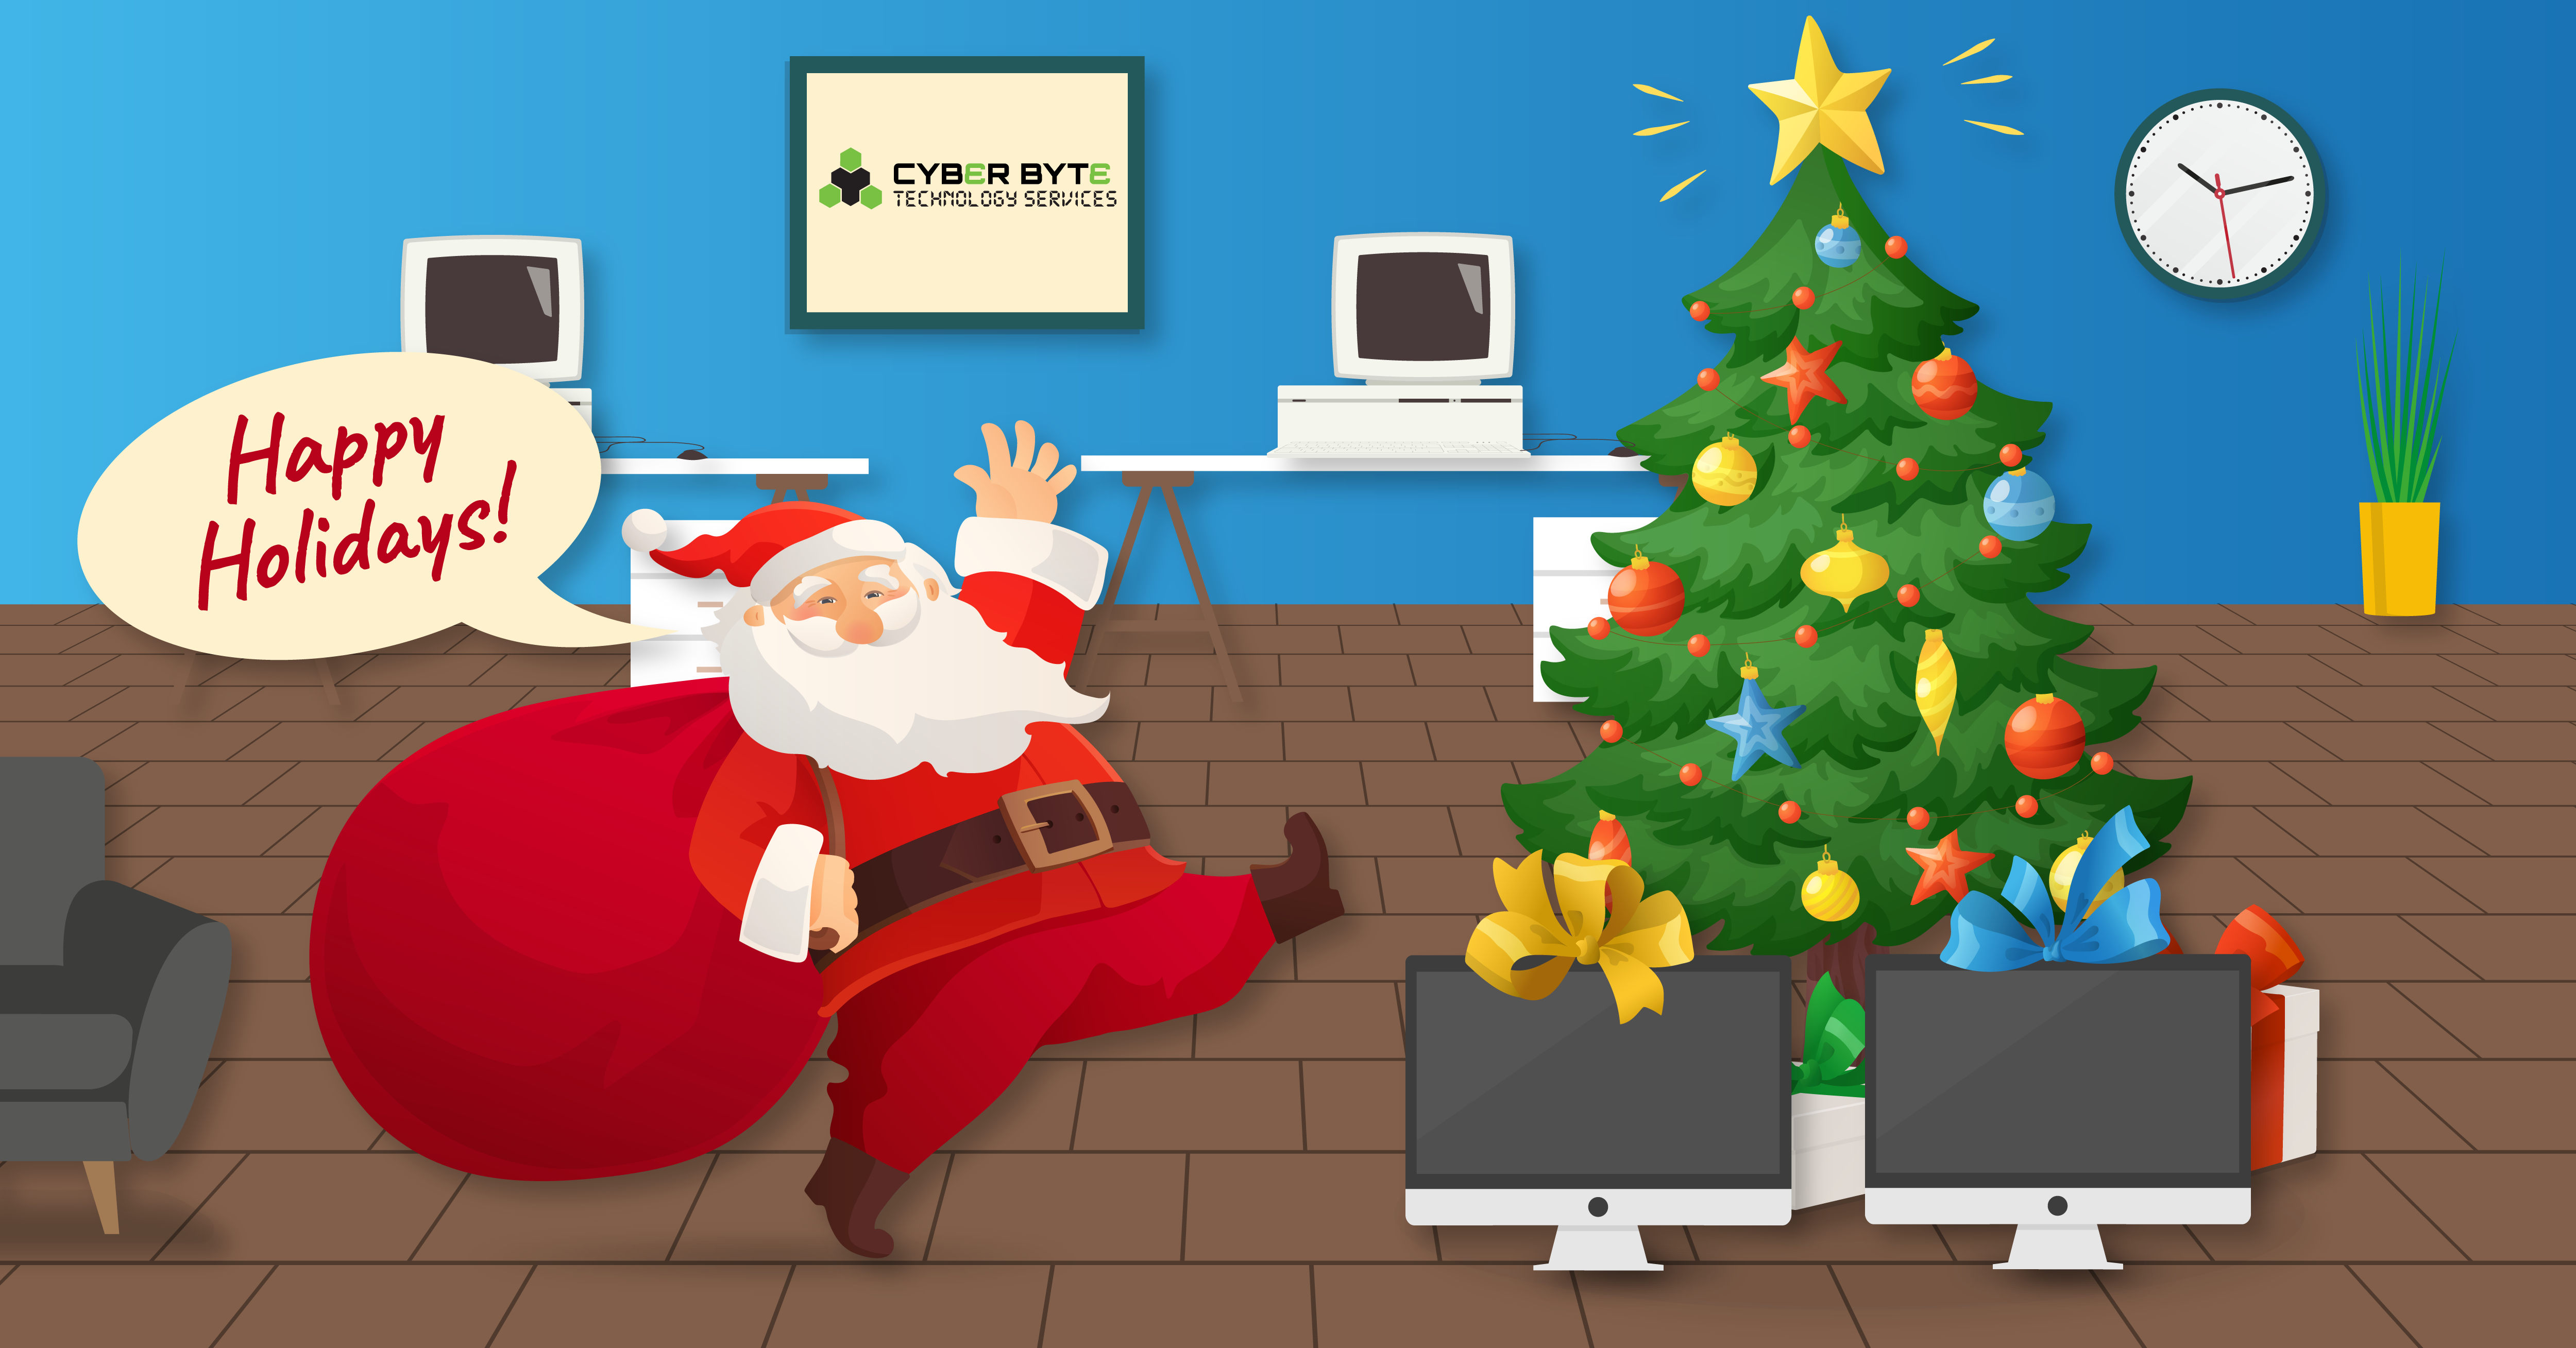 Christmas Card from Cyber Byte